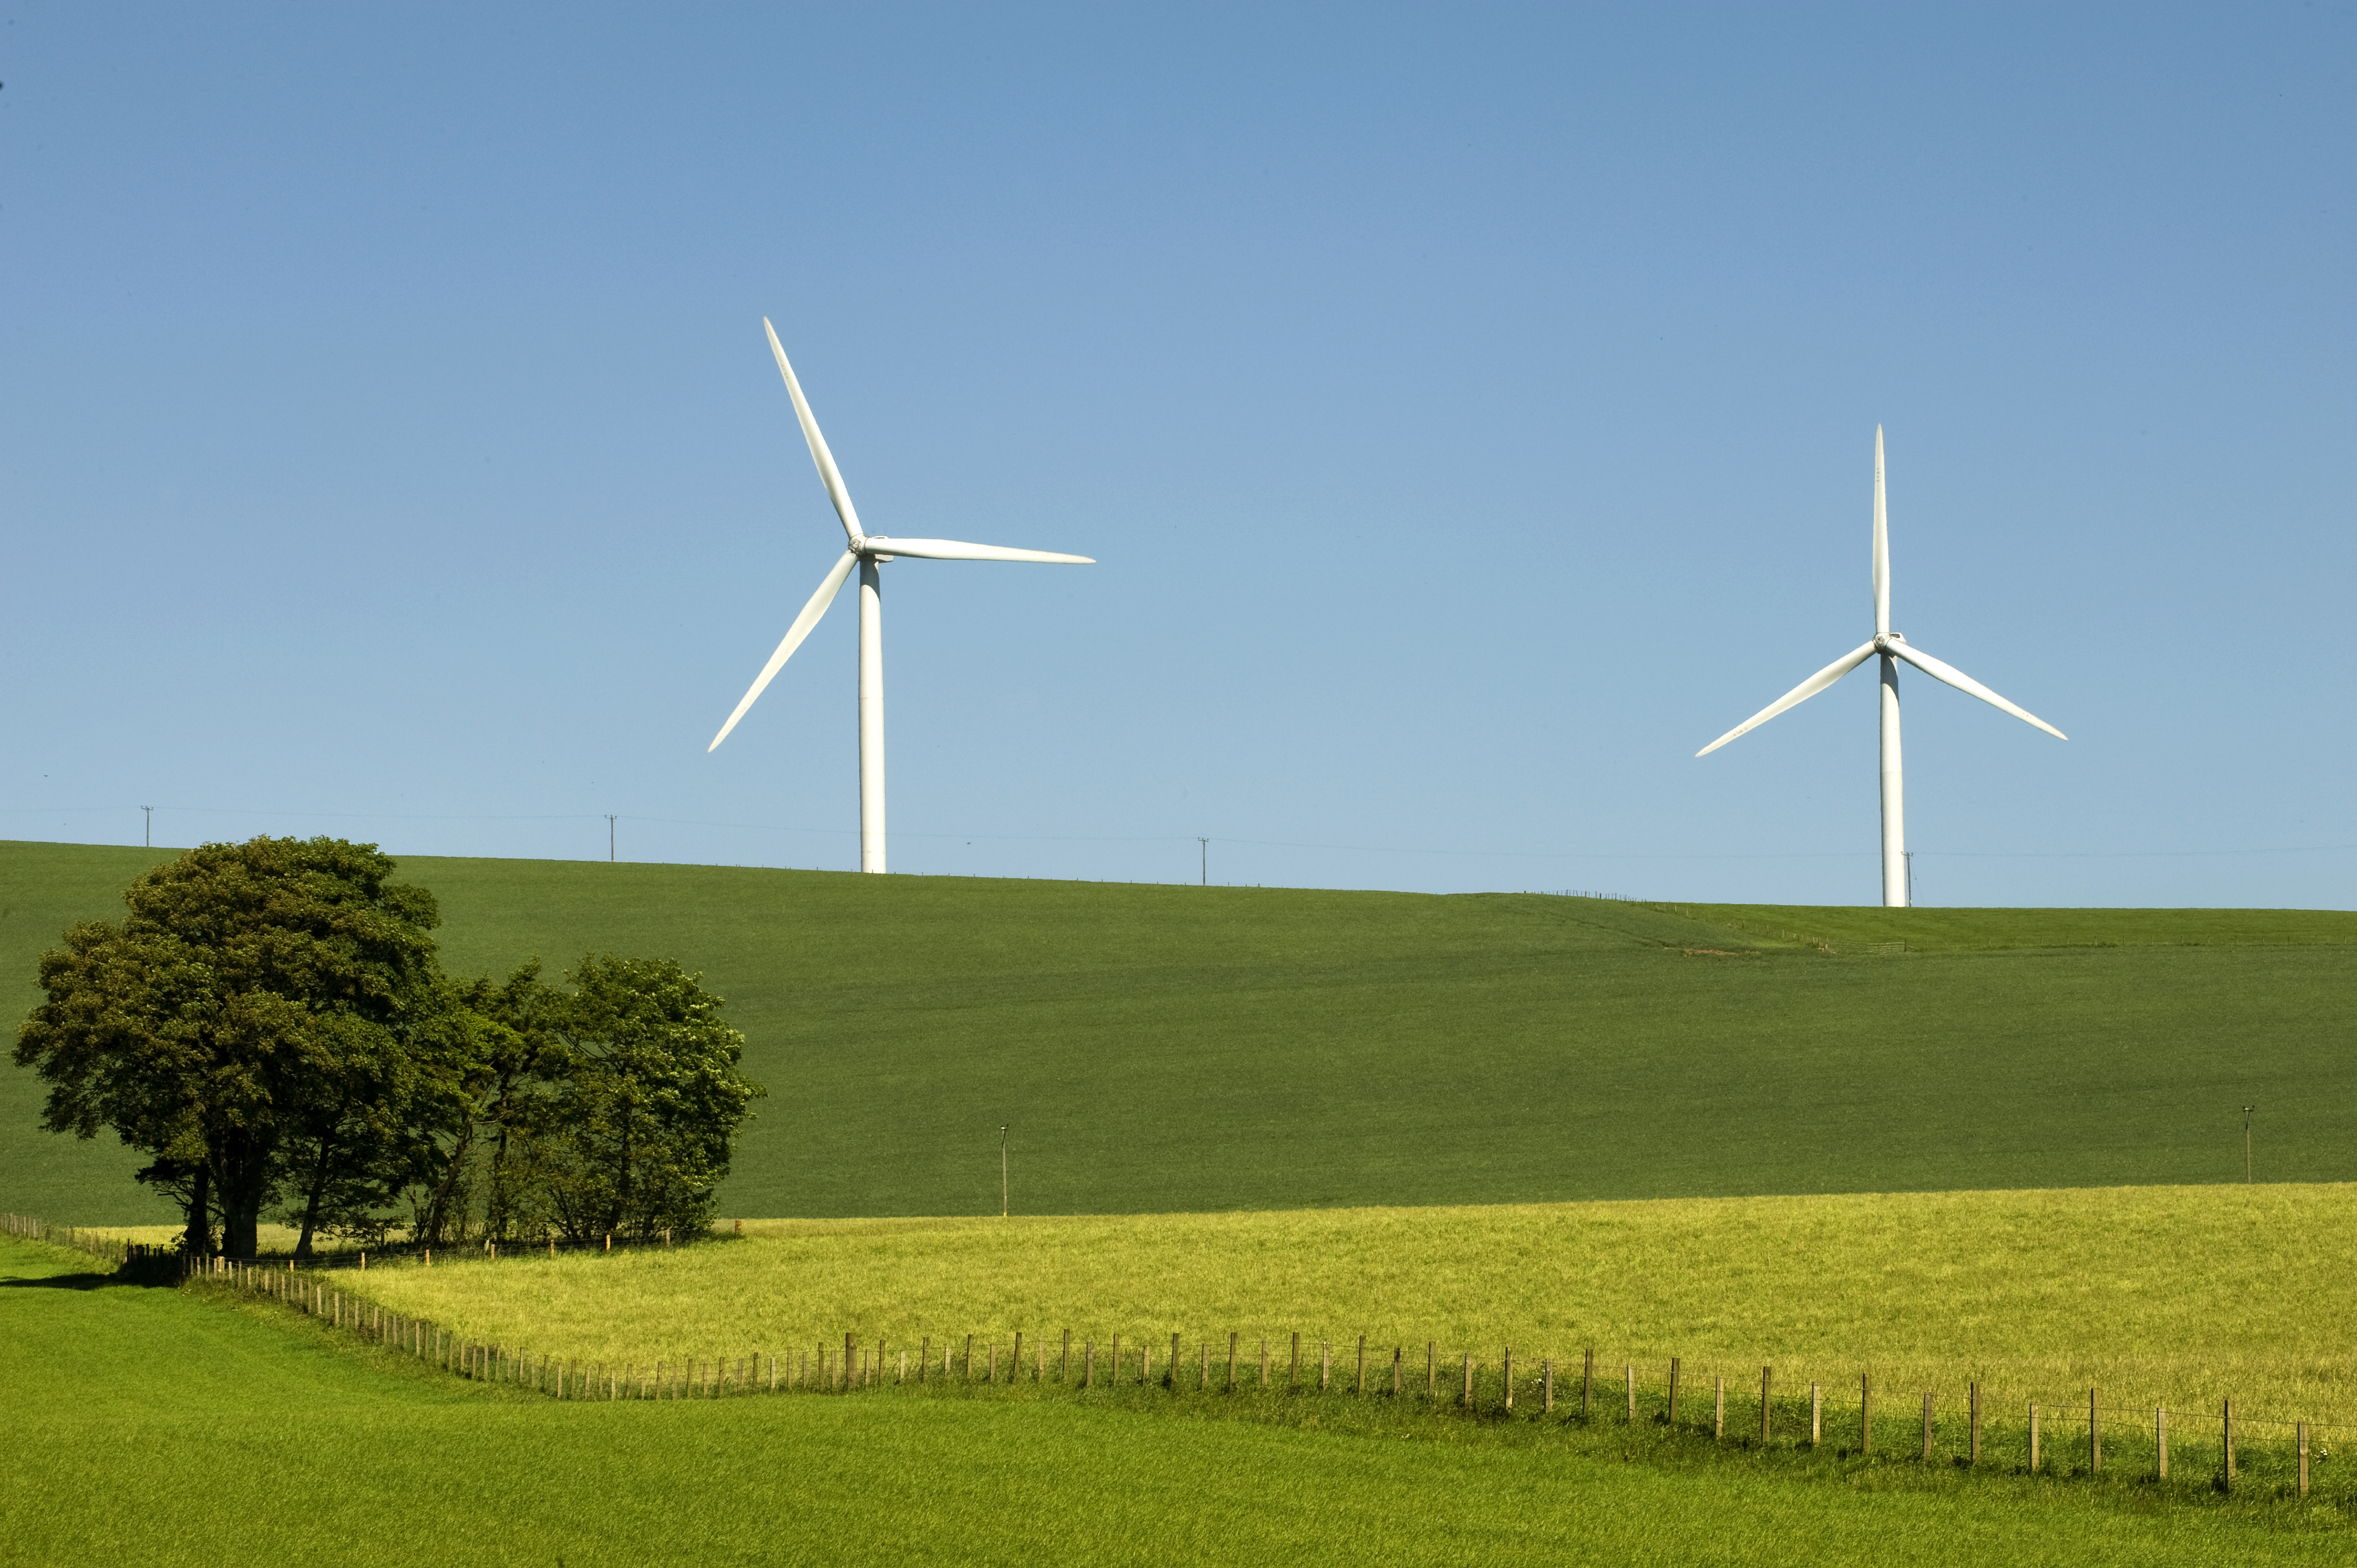 Image of fields with two wind turbines in the background.